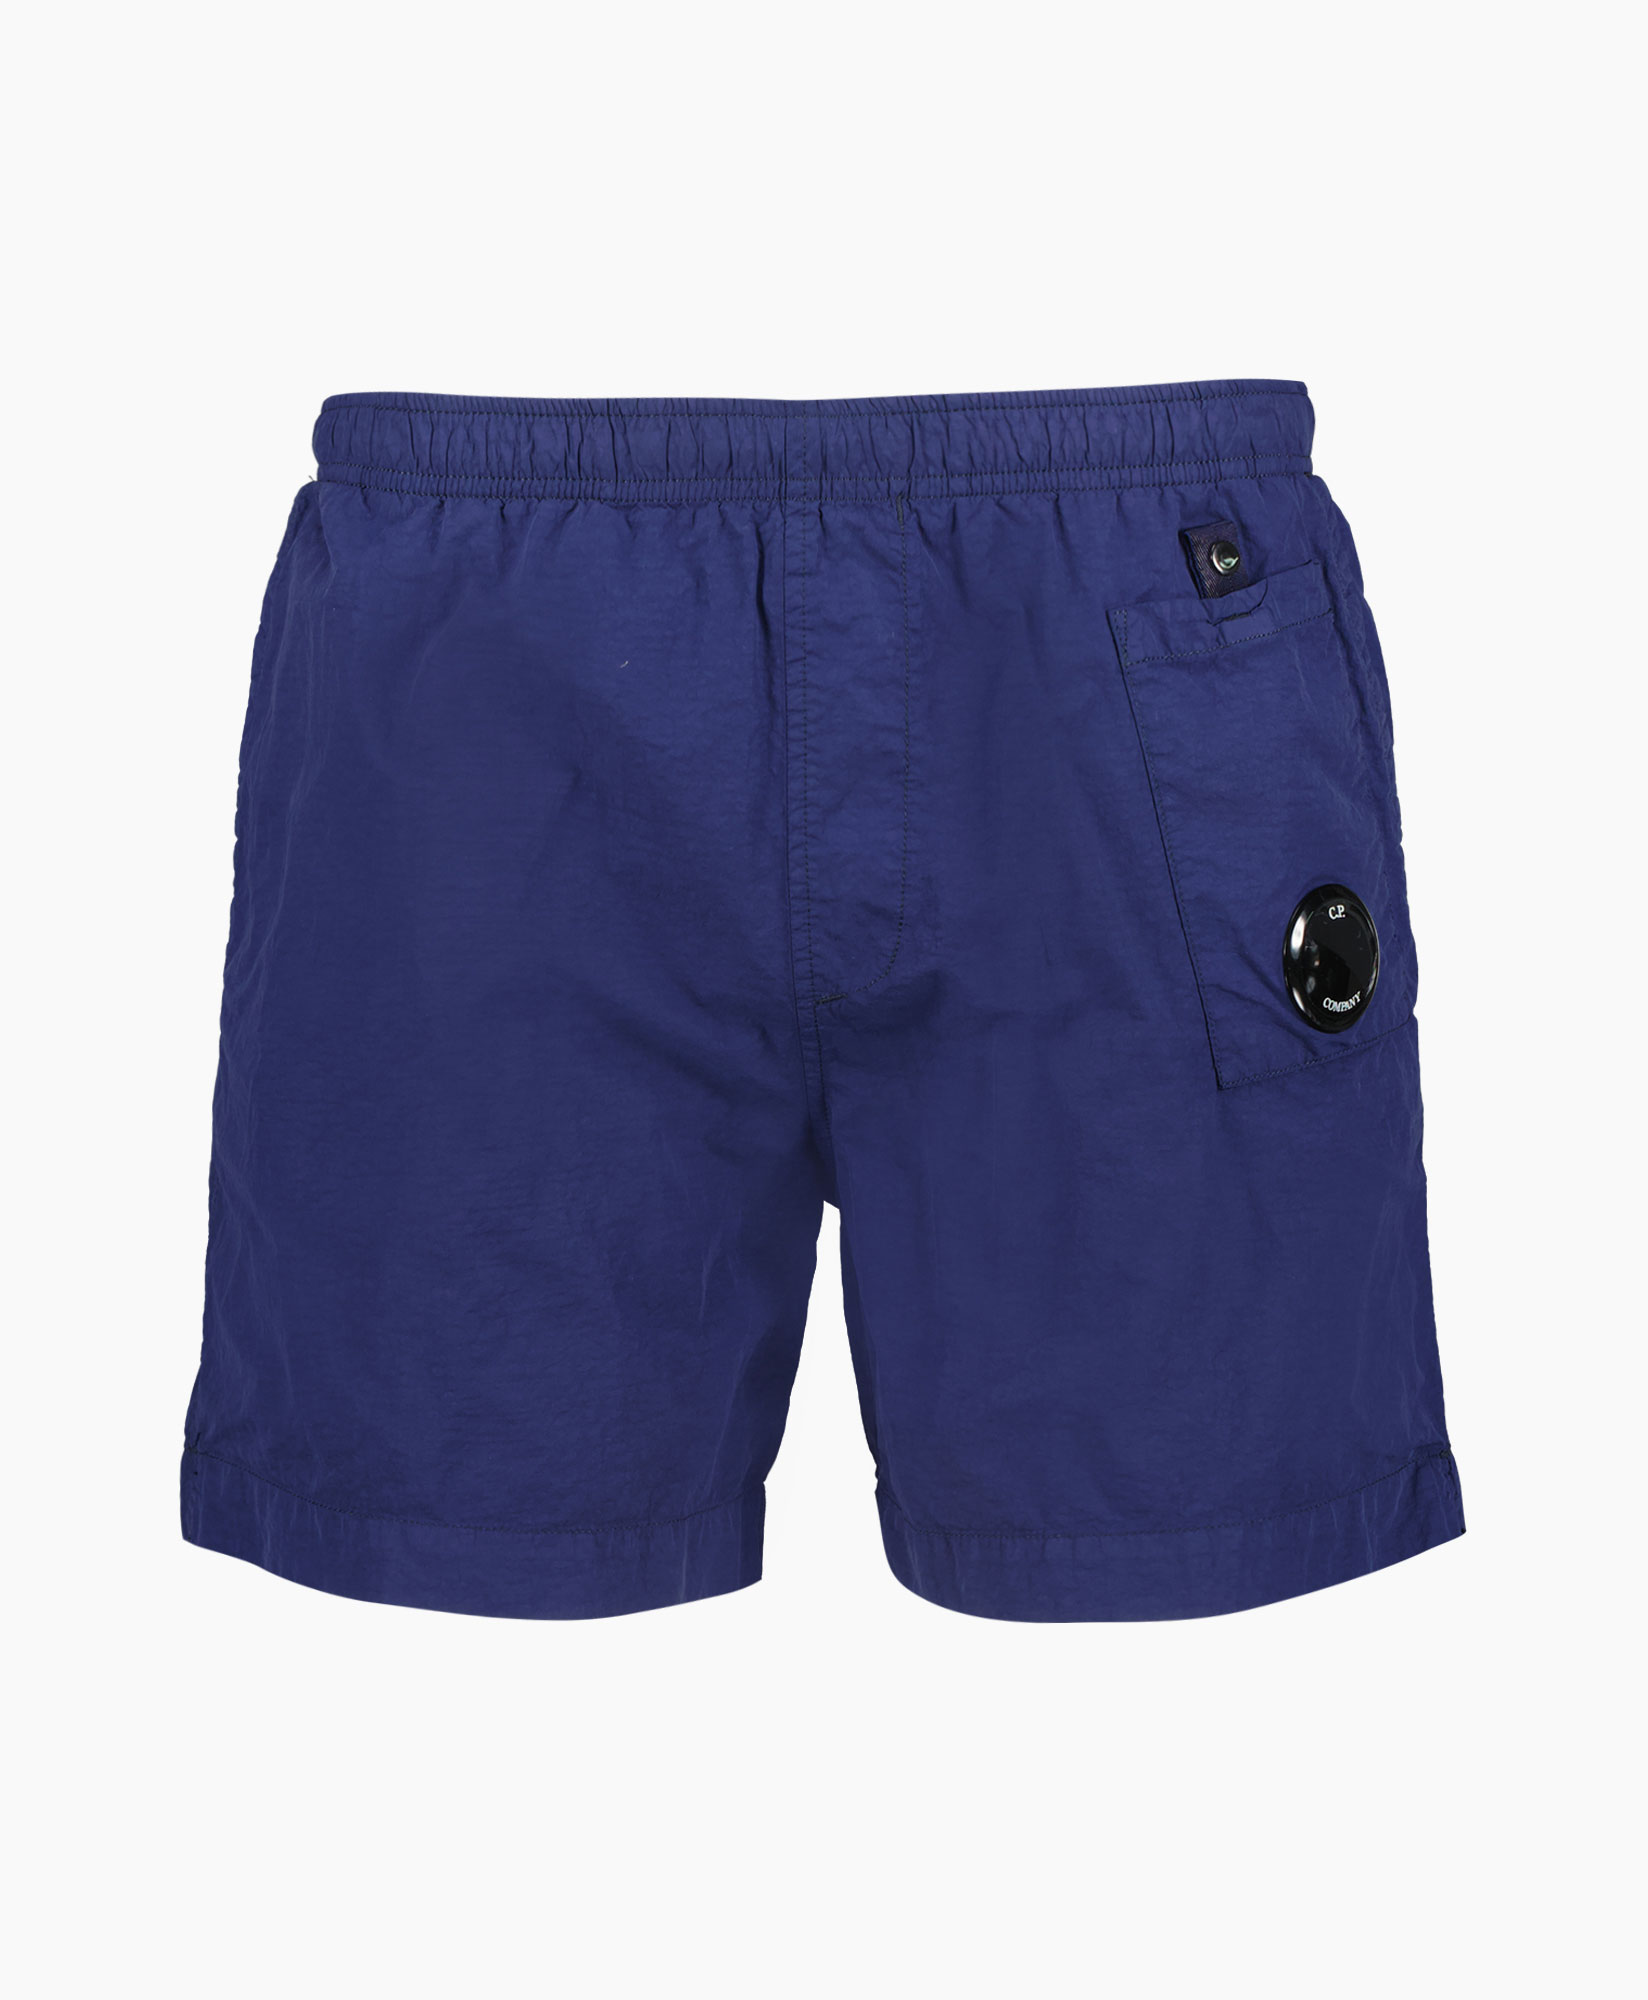 Cp Company Zwembroek 14cmbw006a-005991 Donker Blauw